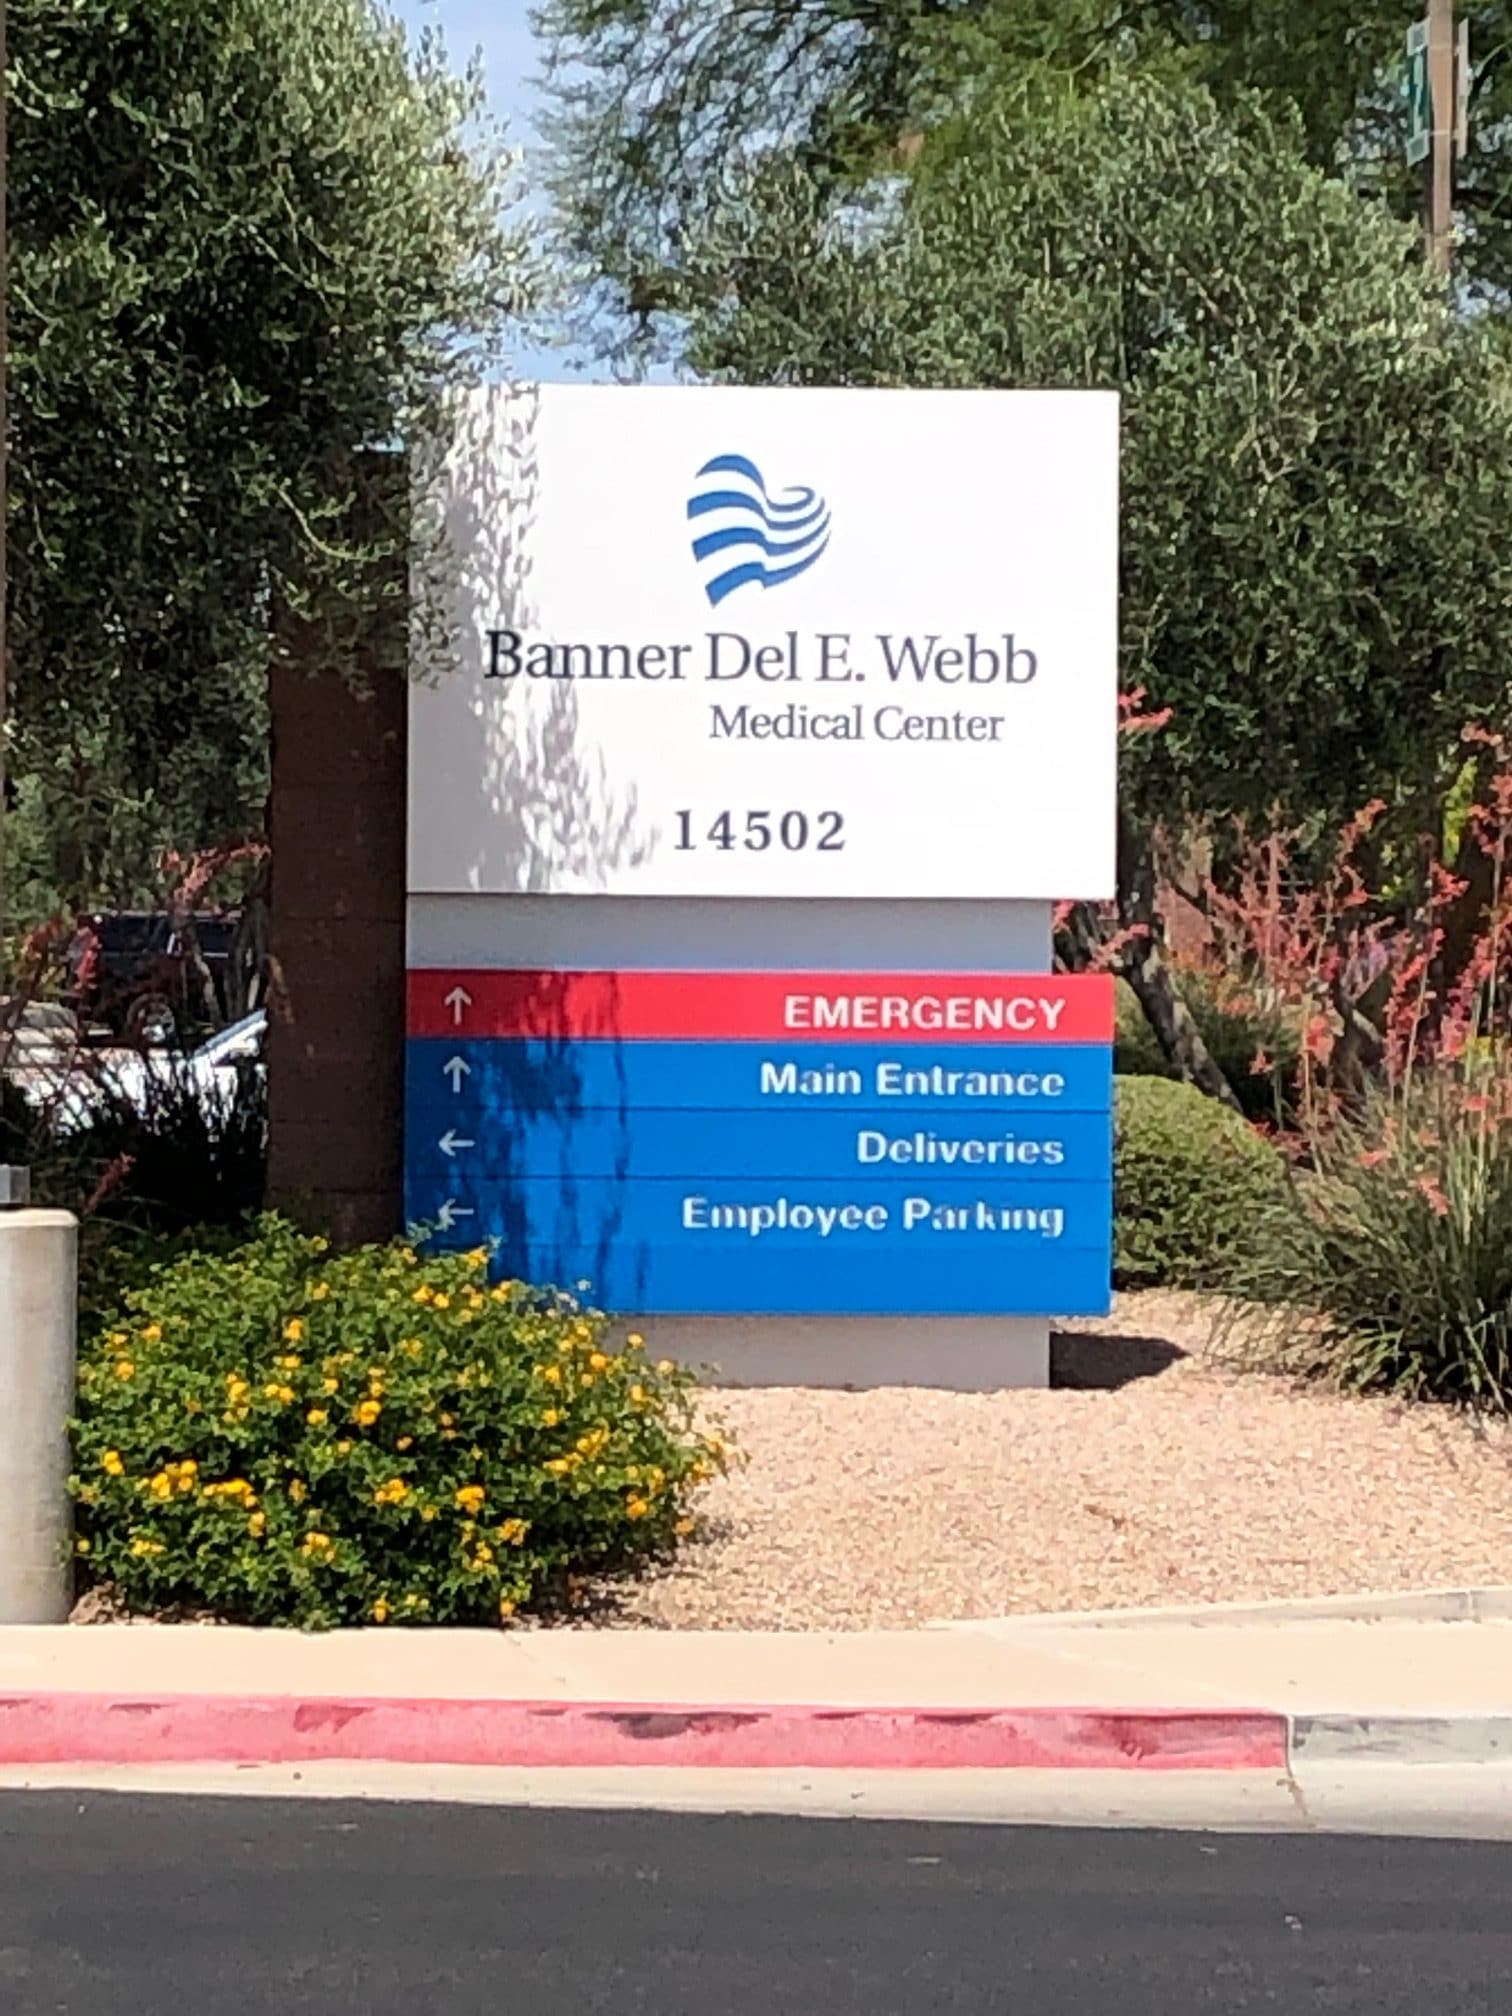 Banner Del Webb Hospital is the largest of the Surprise AZ medical centers